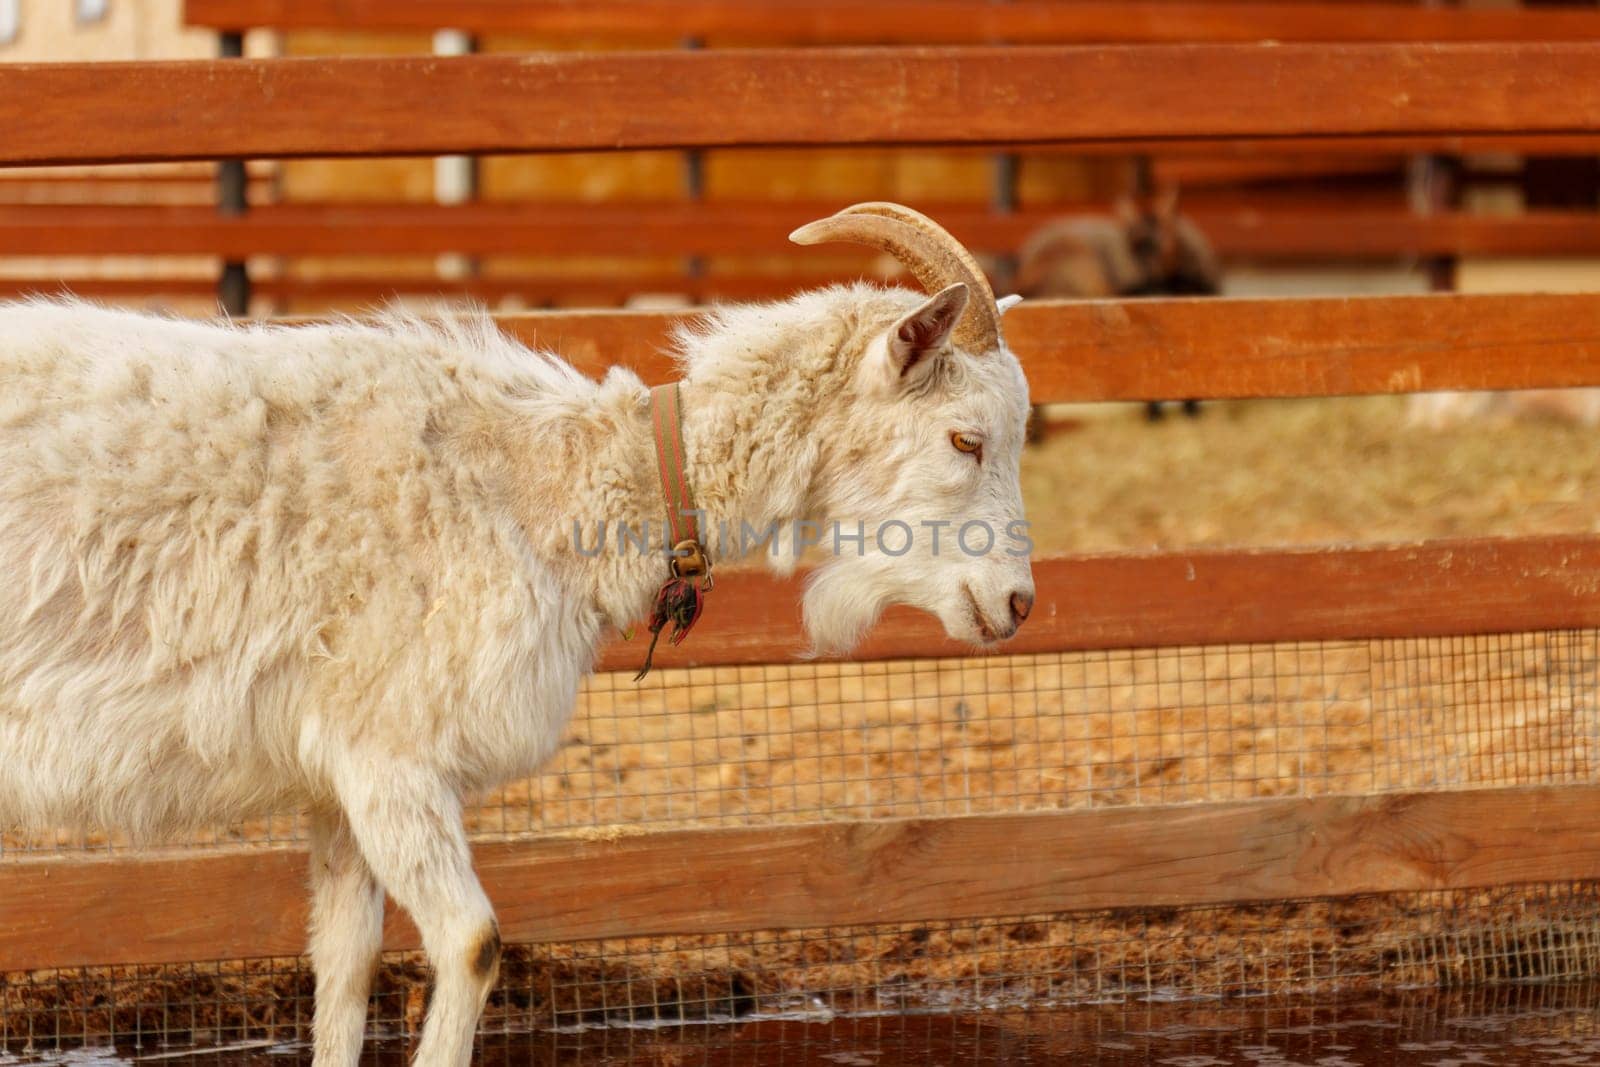 White goat stands next to a sturdy wooden fence on a farm, showcasing a portrait of agriculture.